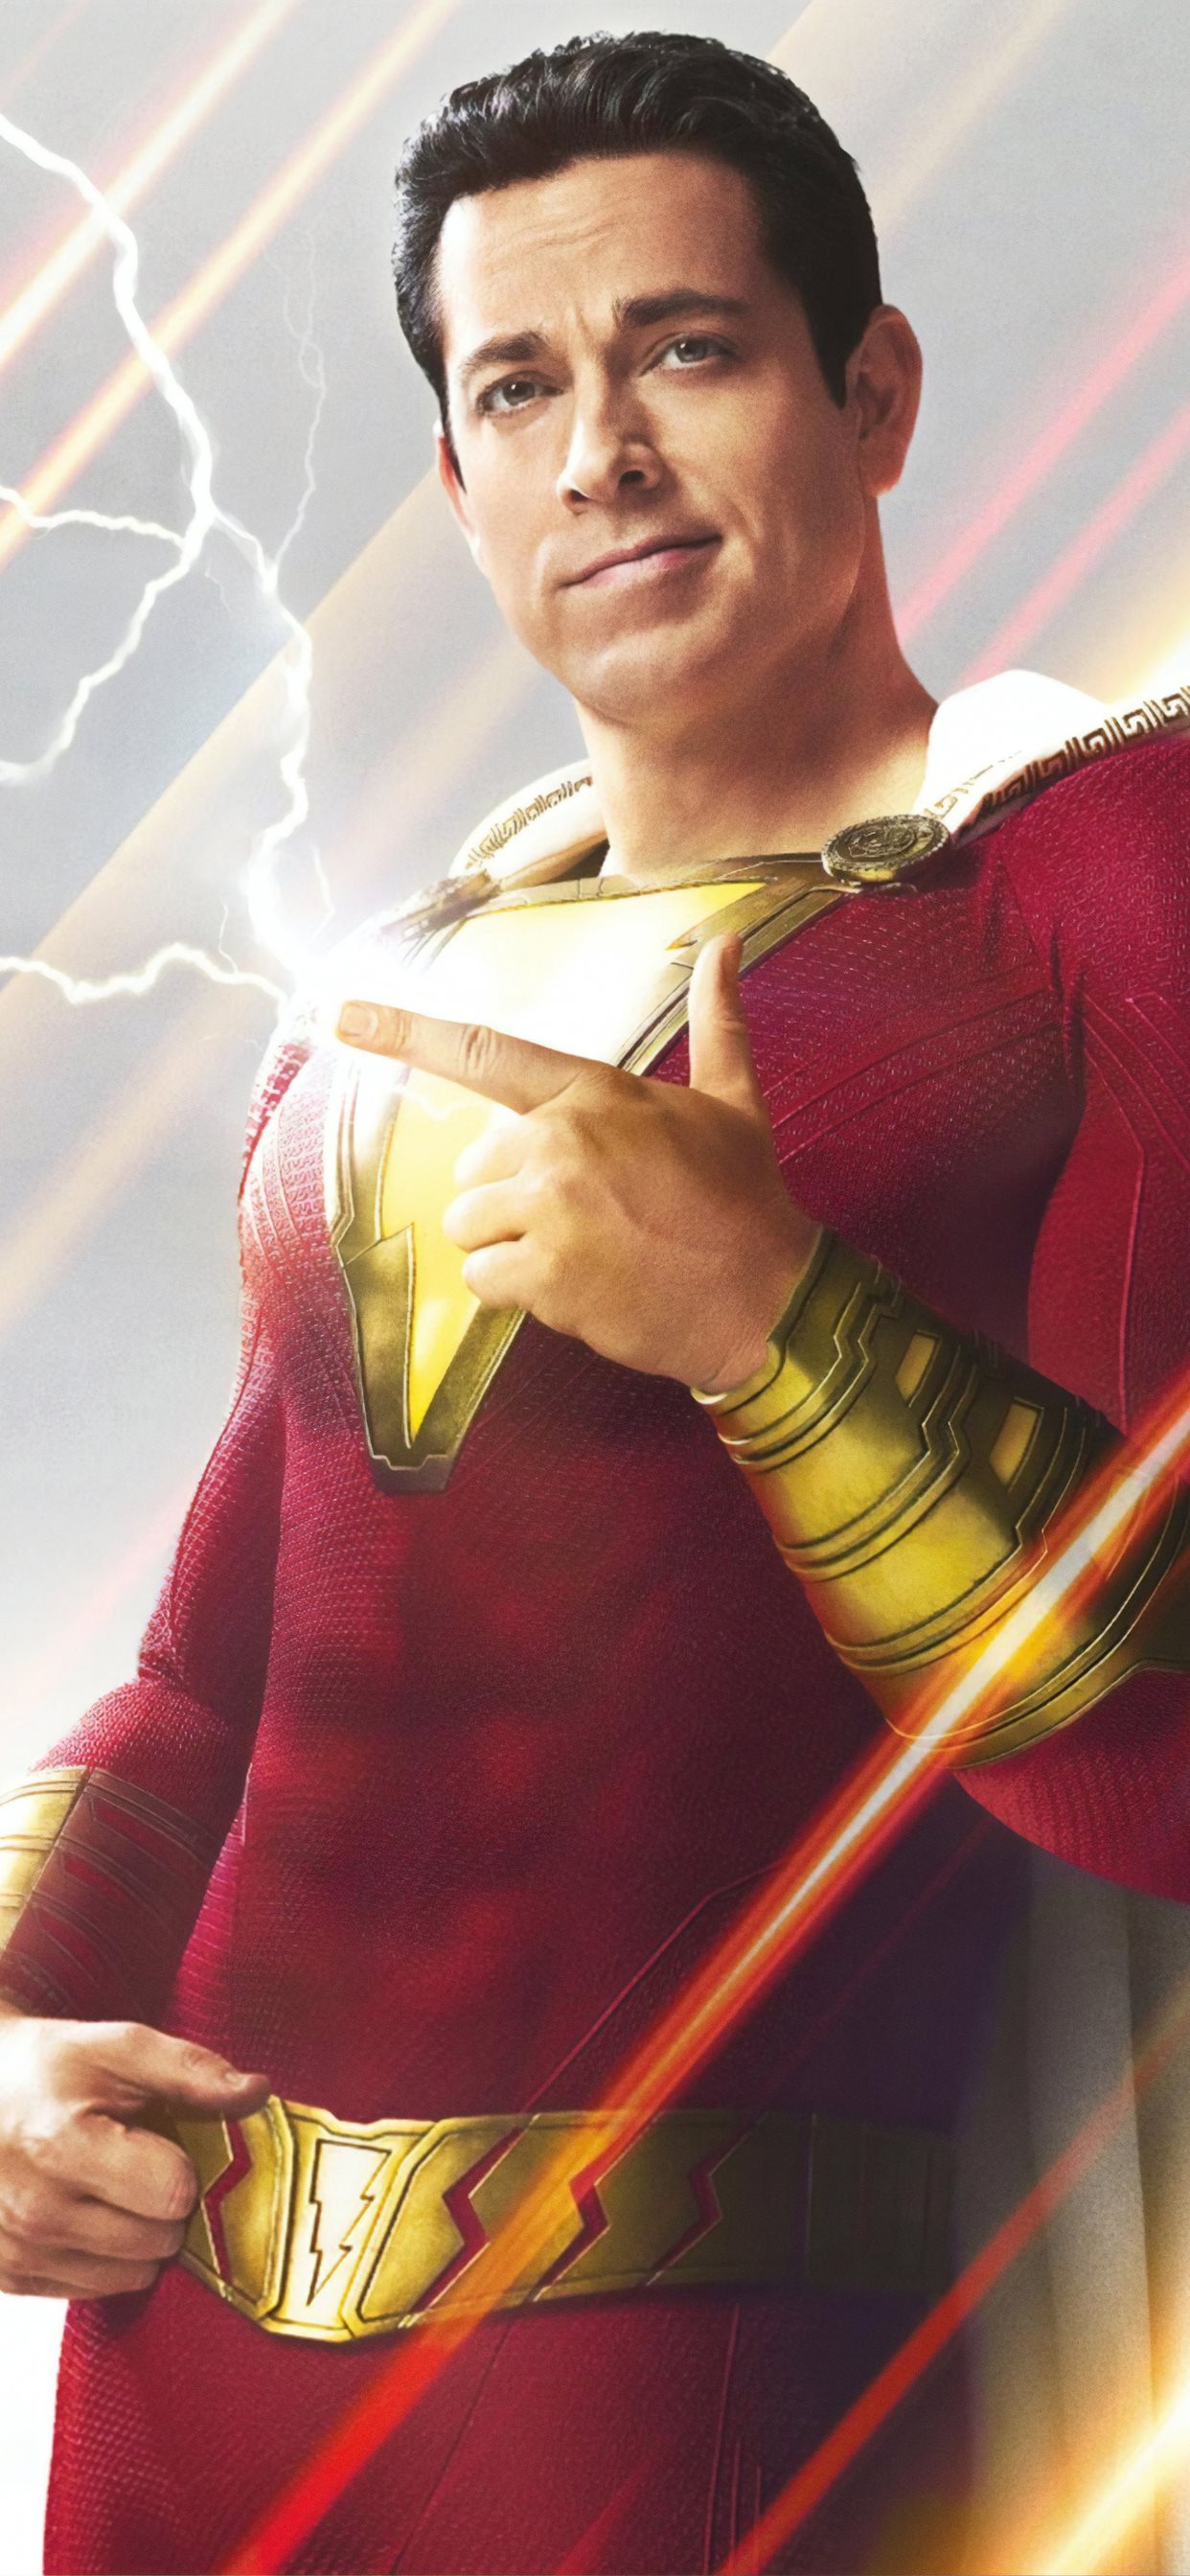 shazam movie 4k poster iPhone X Wallpapers Free Download